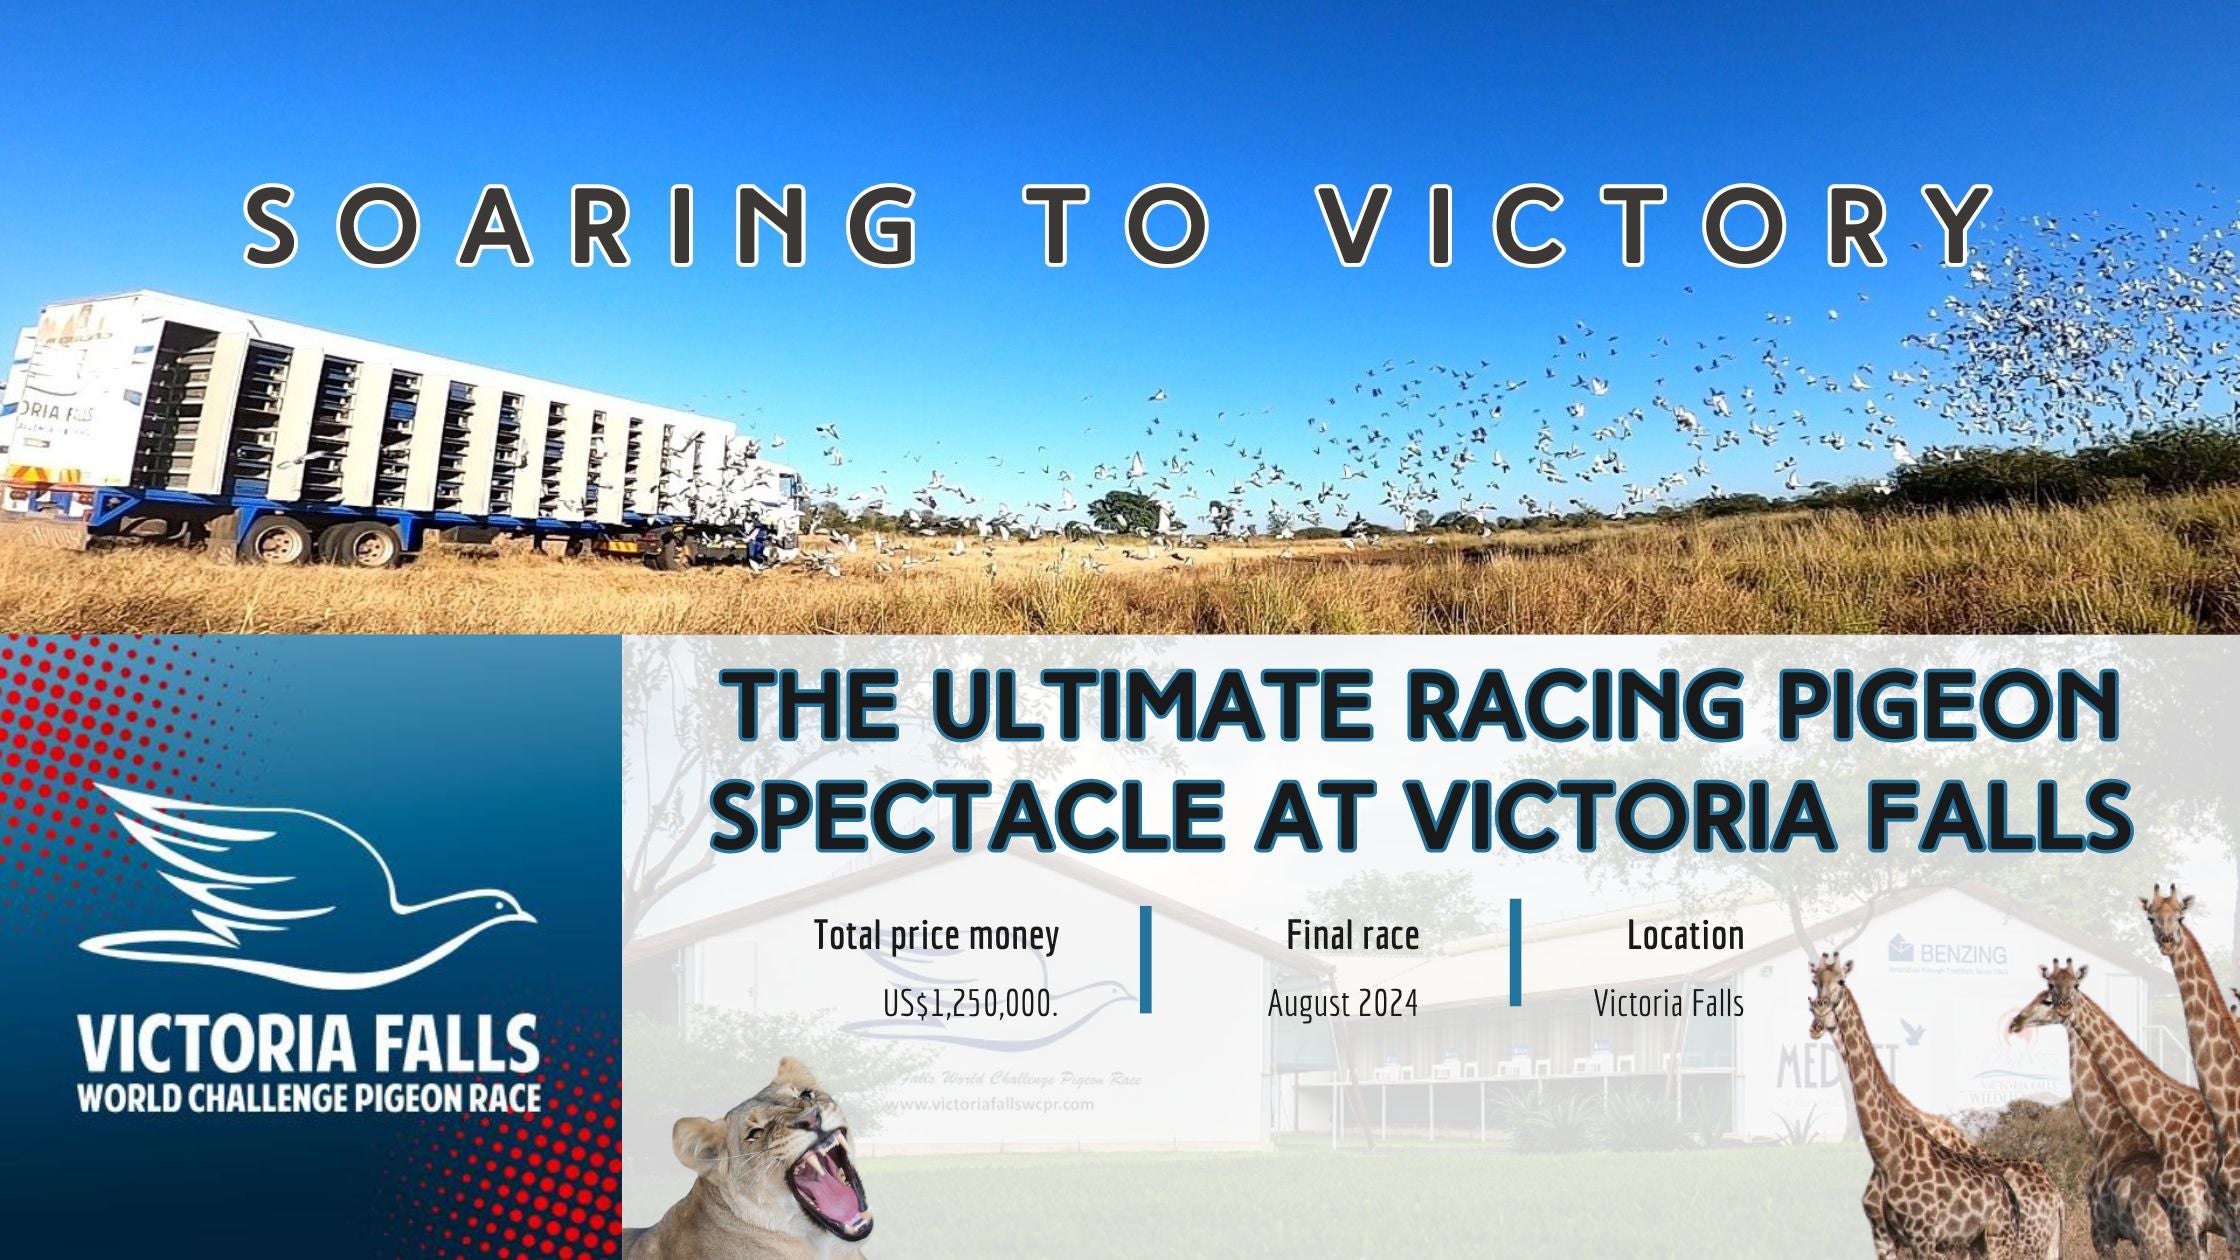 Soaring to Victory: The Ultimate Racing Pigeon Spectacle at Victoria Falls